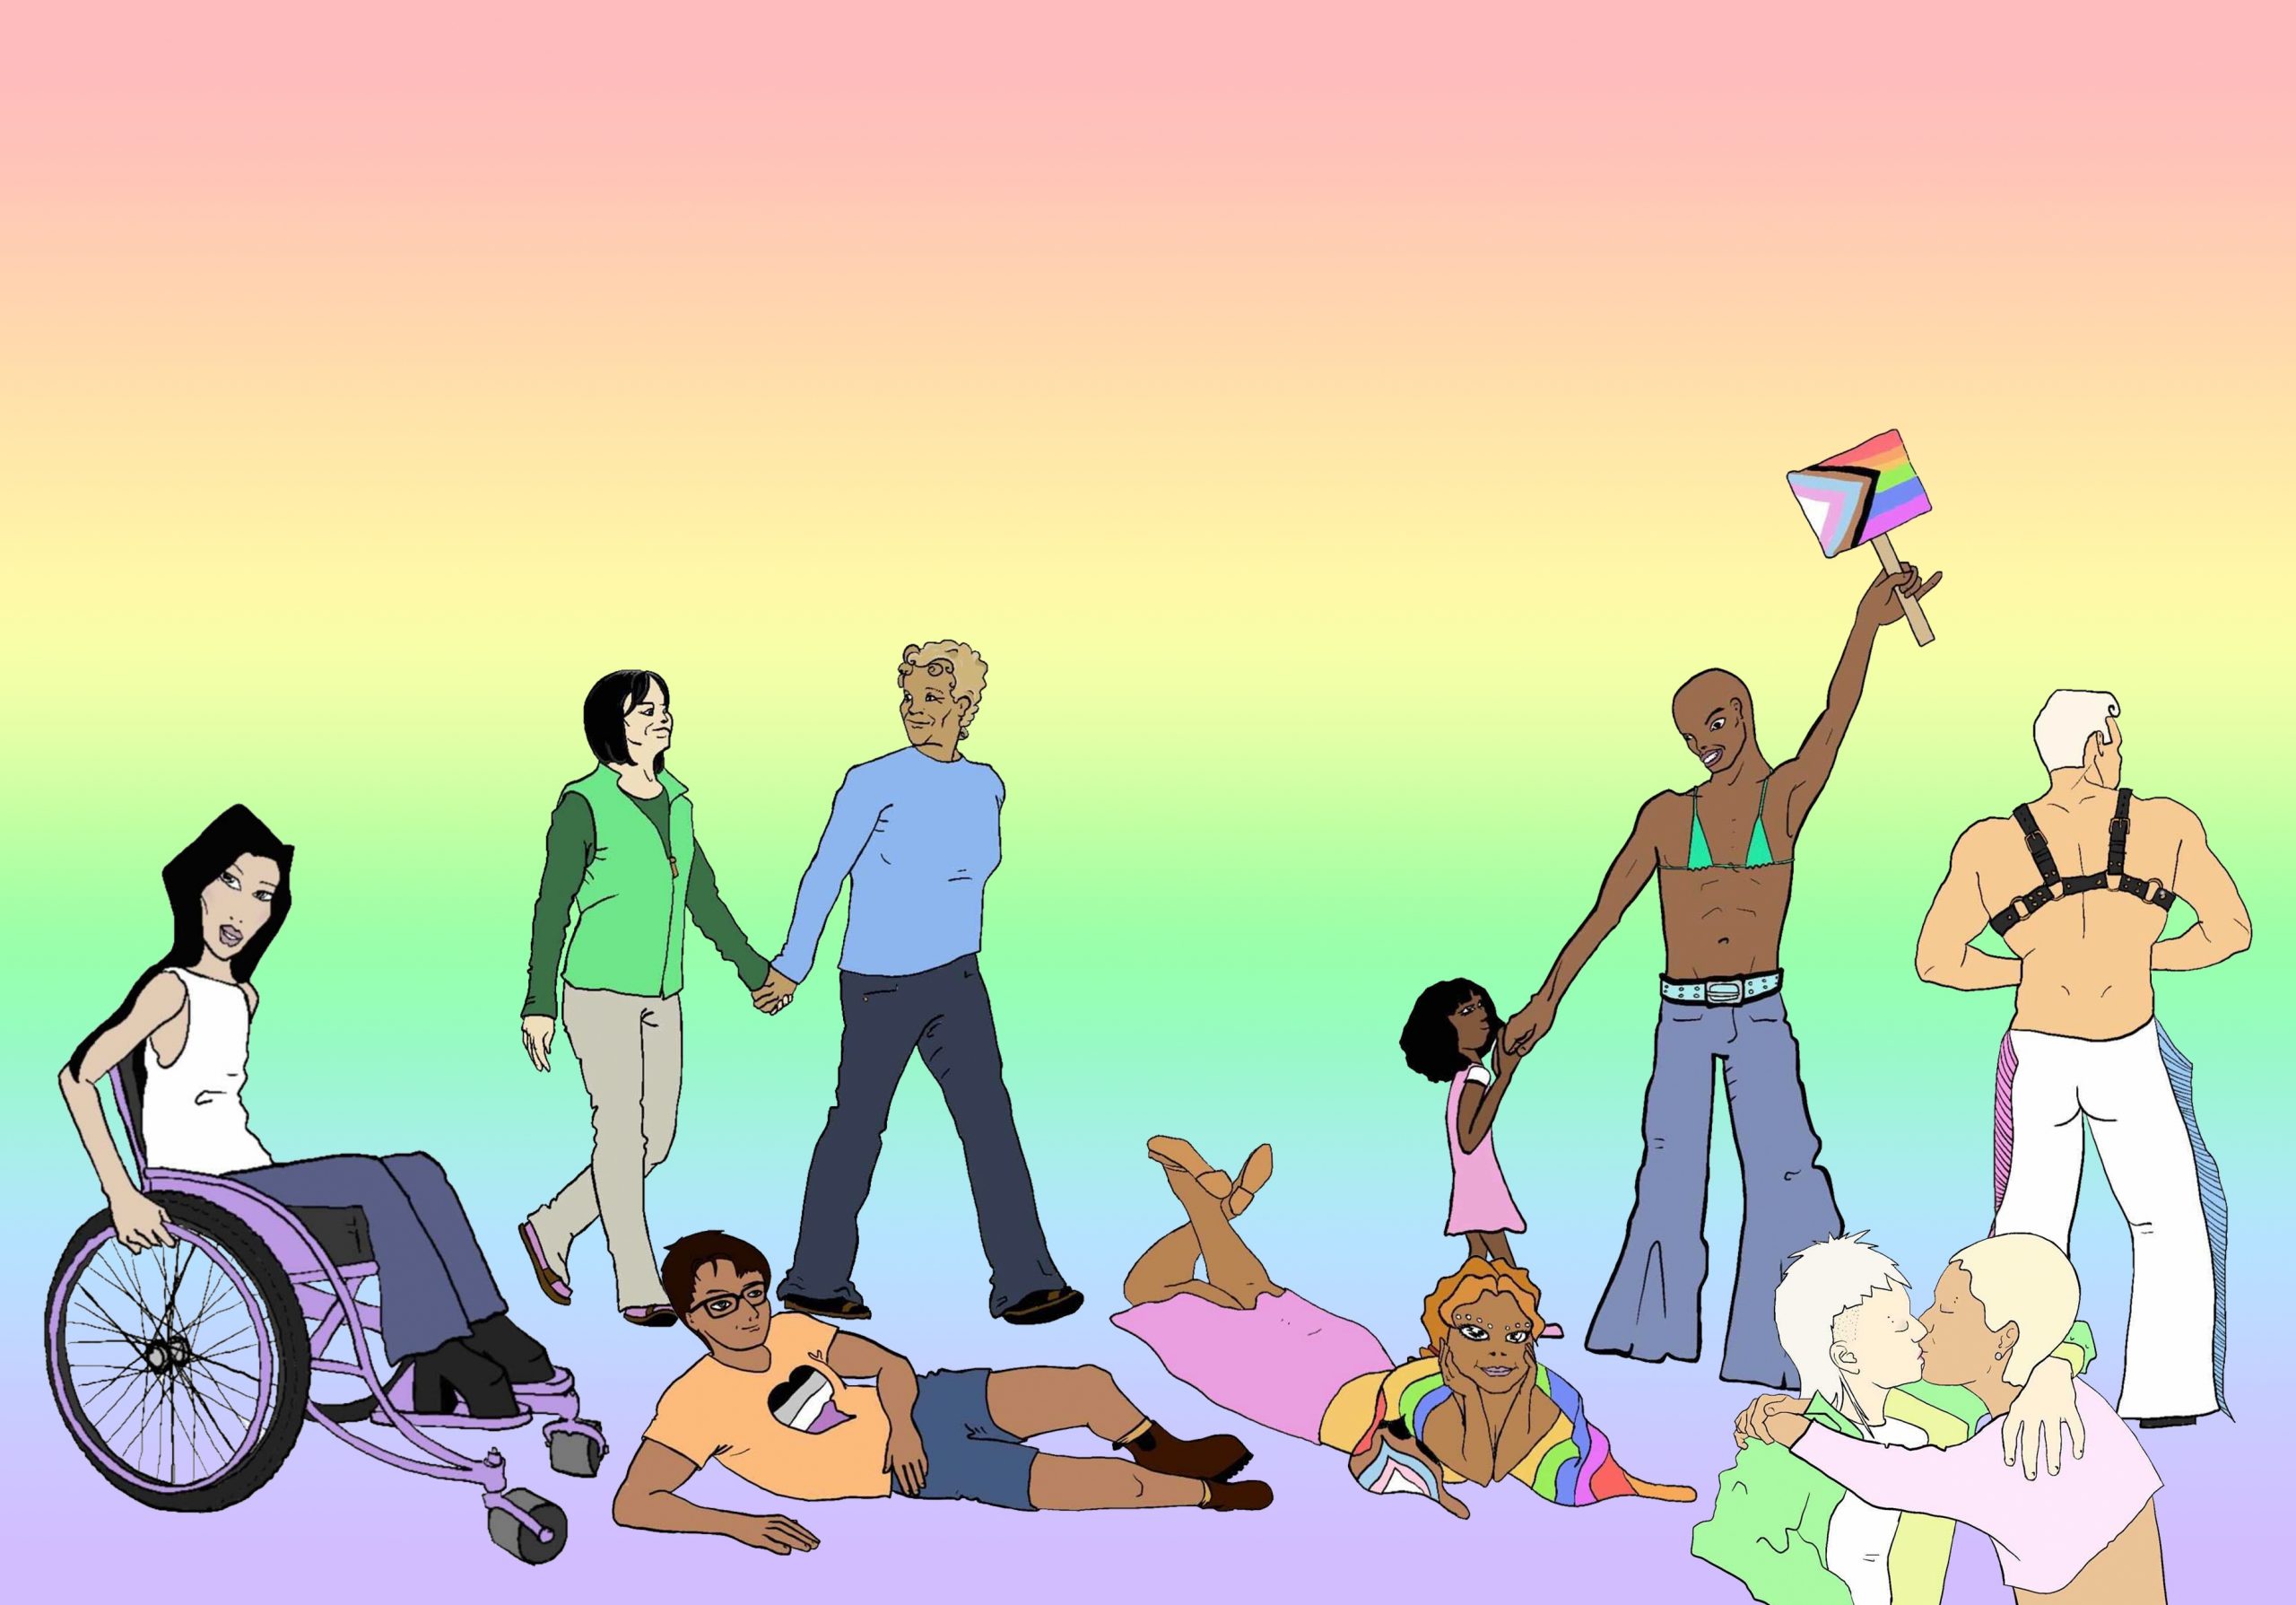 A digital illustration of a black-haired, light-skinned femme in white tanktop, jeans, and black boots in a wheelchair, an older black-haired, light-skinned femme in a green vest holding hands with a brown femme with blonde hair and wearing a blue shirt, a lounging brown masc with glasses and an asexual heart t-shirt, a lounging femme in a pink dress and draped in a progress flag, a black femme child in a pink dress holding hands with a bald black person in a green bikini top holding a progress flag, a white masc with white hair wearing a harness, and a white person with a white undercut mullet kissing a brown person with blonde hair. The background is a pastel rainbow gradient.